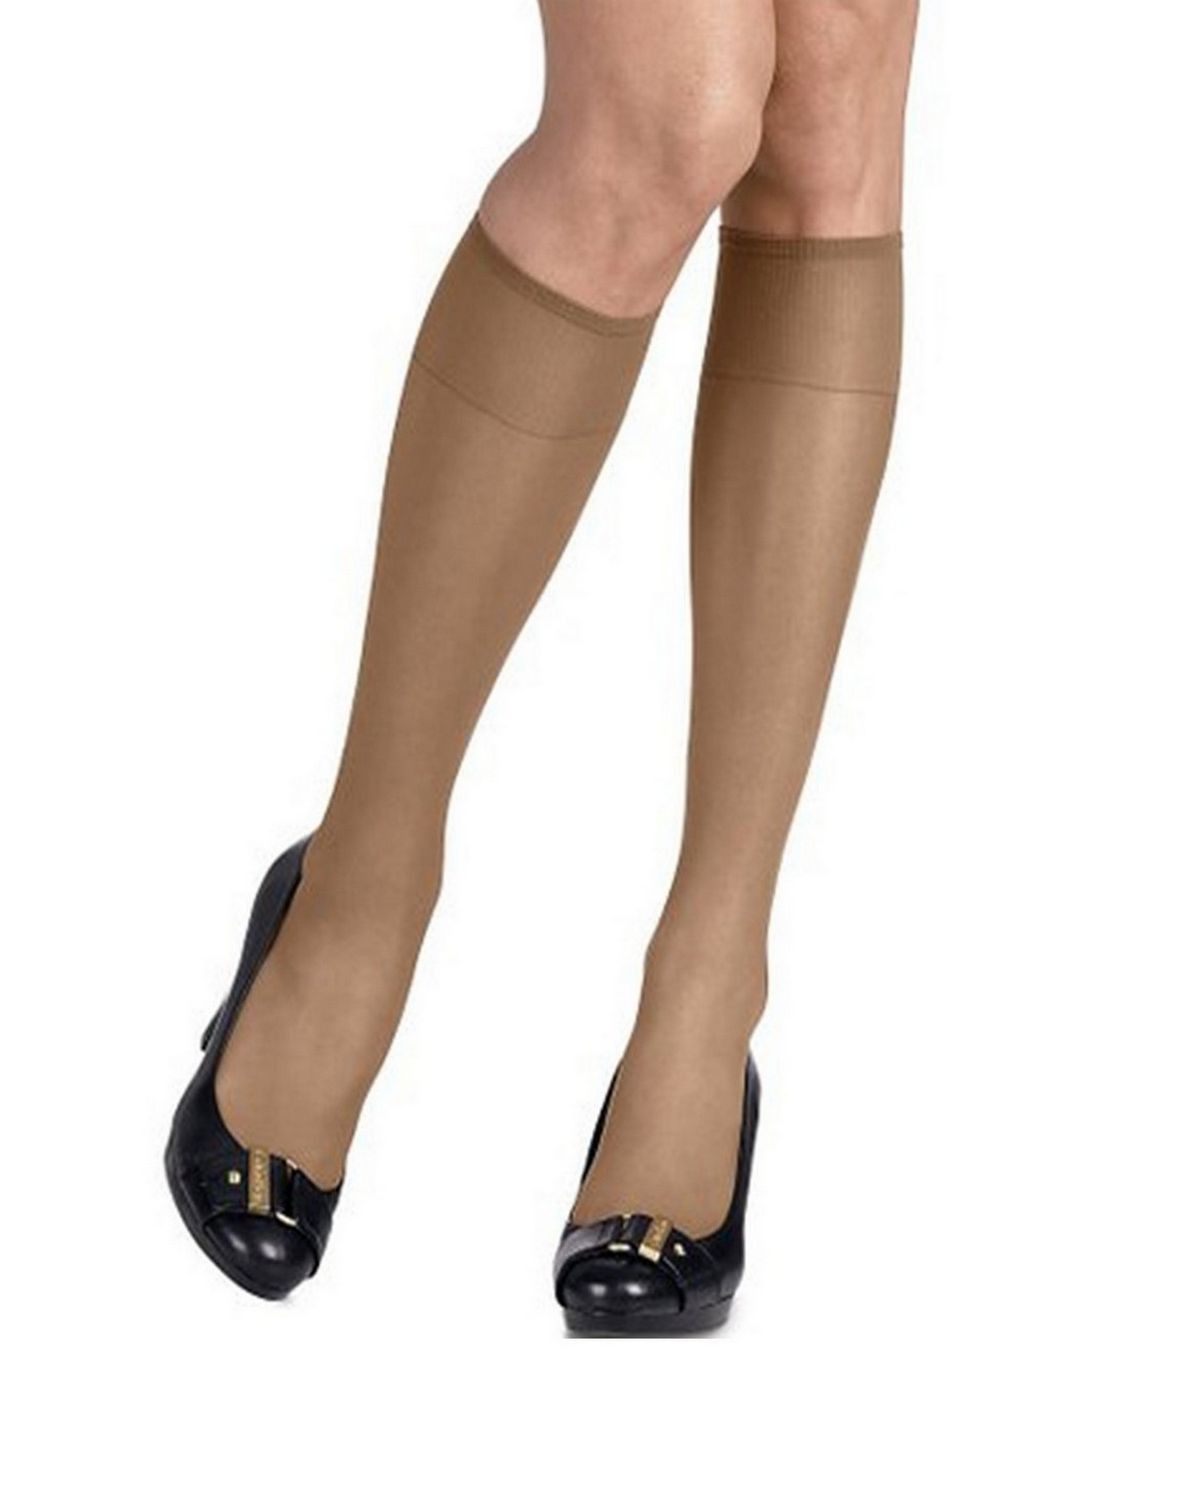 Hanes 725 Women's Silk Reflections Silky Sheer Knee Highs 2-Pack - Barely There - One Size #silk